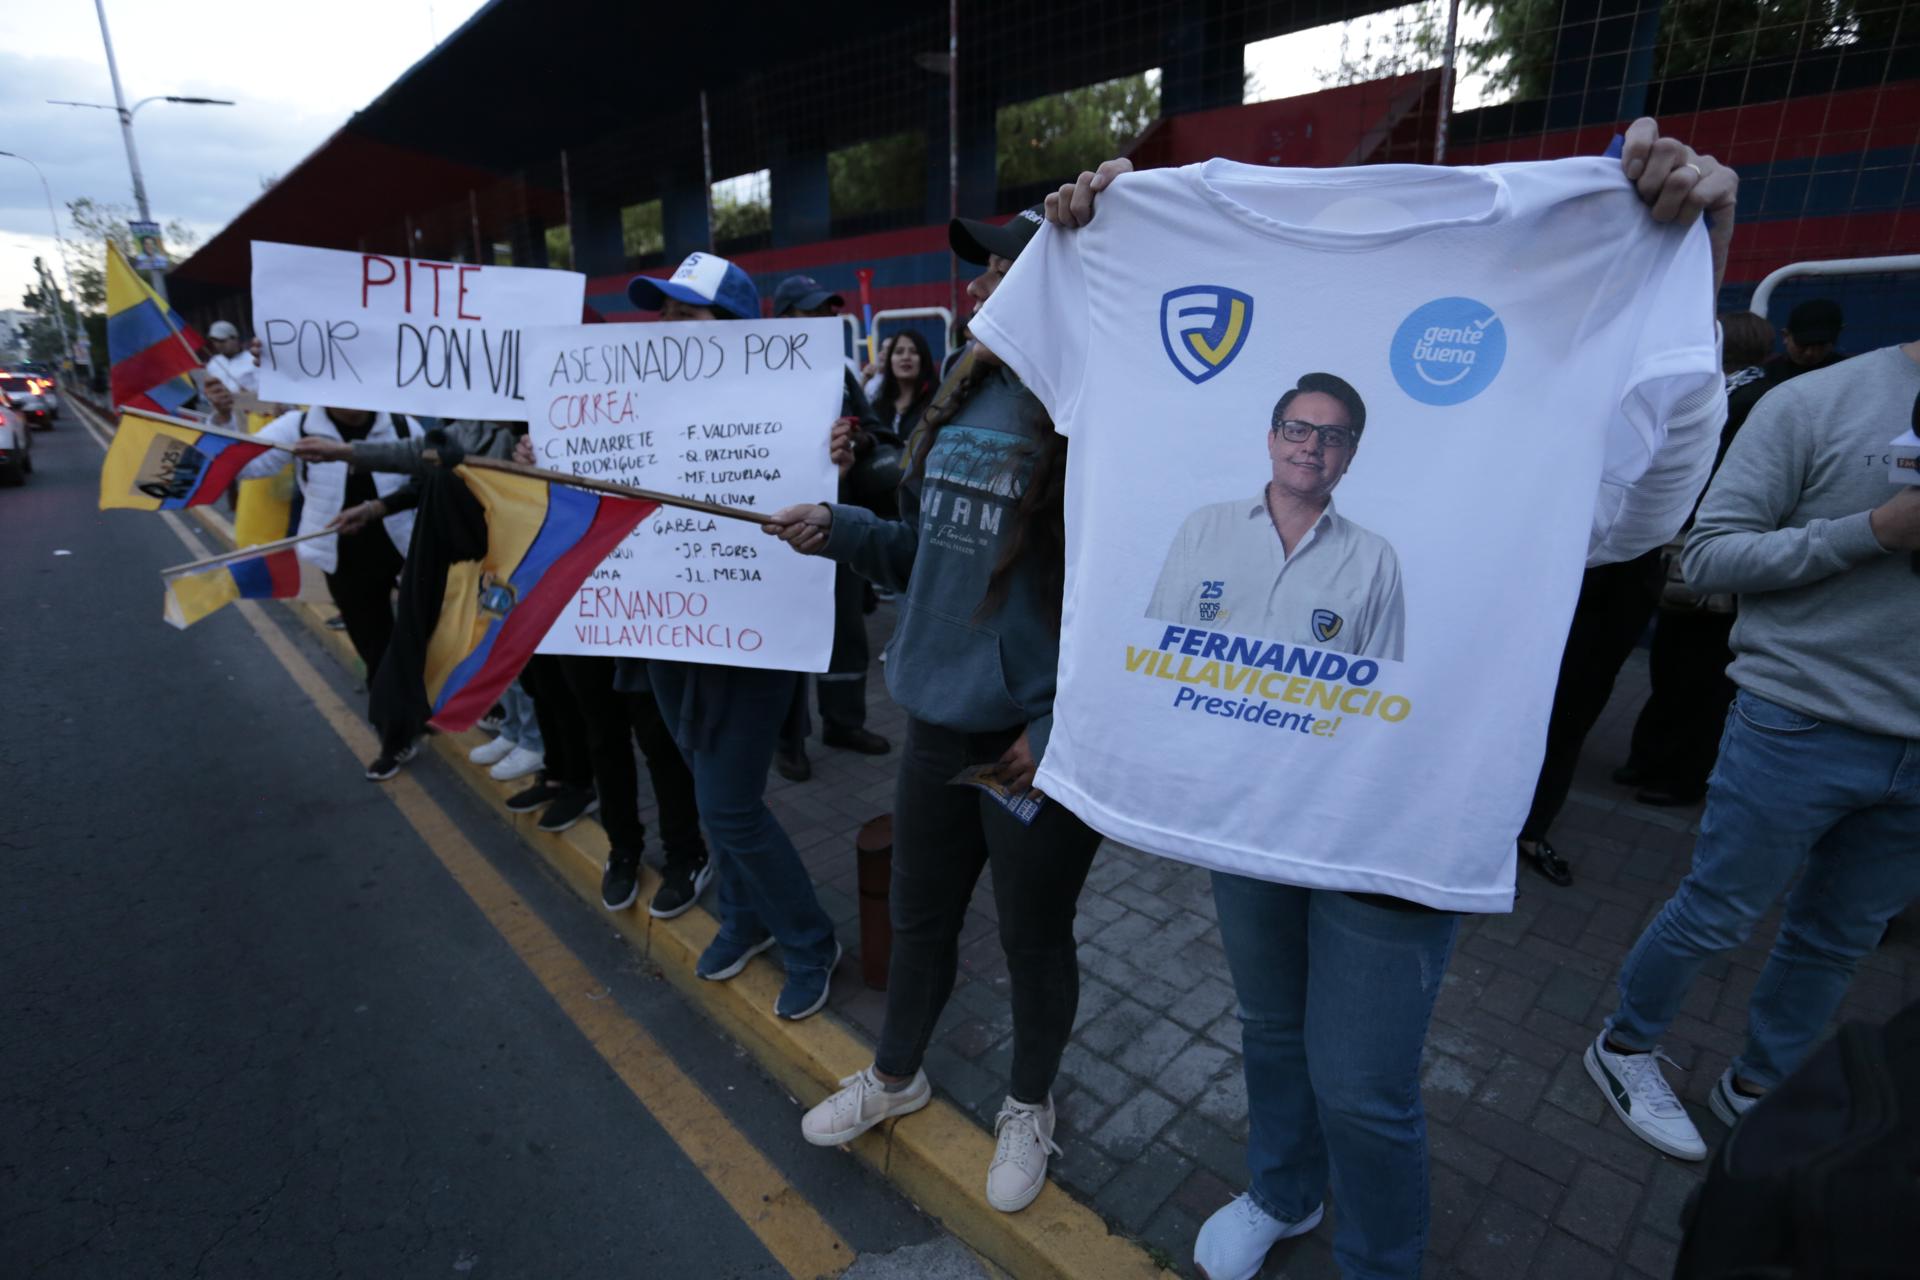 Supporters of the presidential candidate Fernando Villavicencio take to the streets proclaiming Villavicencio as "eternal president", after his assassination yesterday at the exit of an electoral rally of his campaign in Quito, Ecuador, 10 August 2023. EFE-EPA/Santiago Fernandez